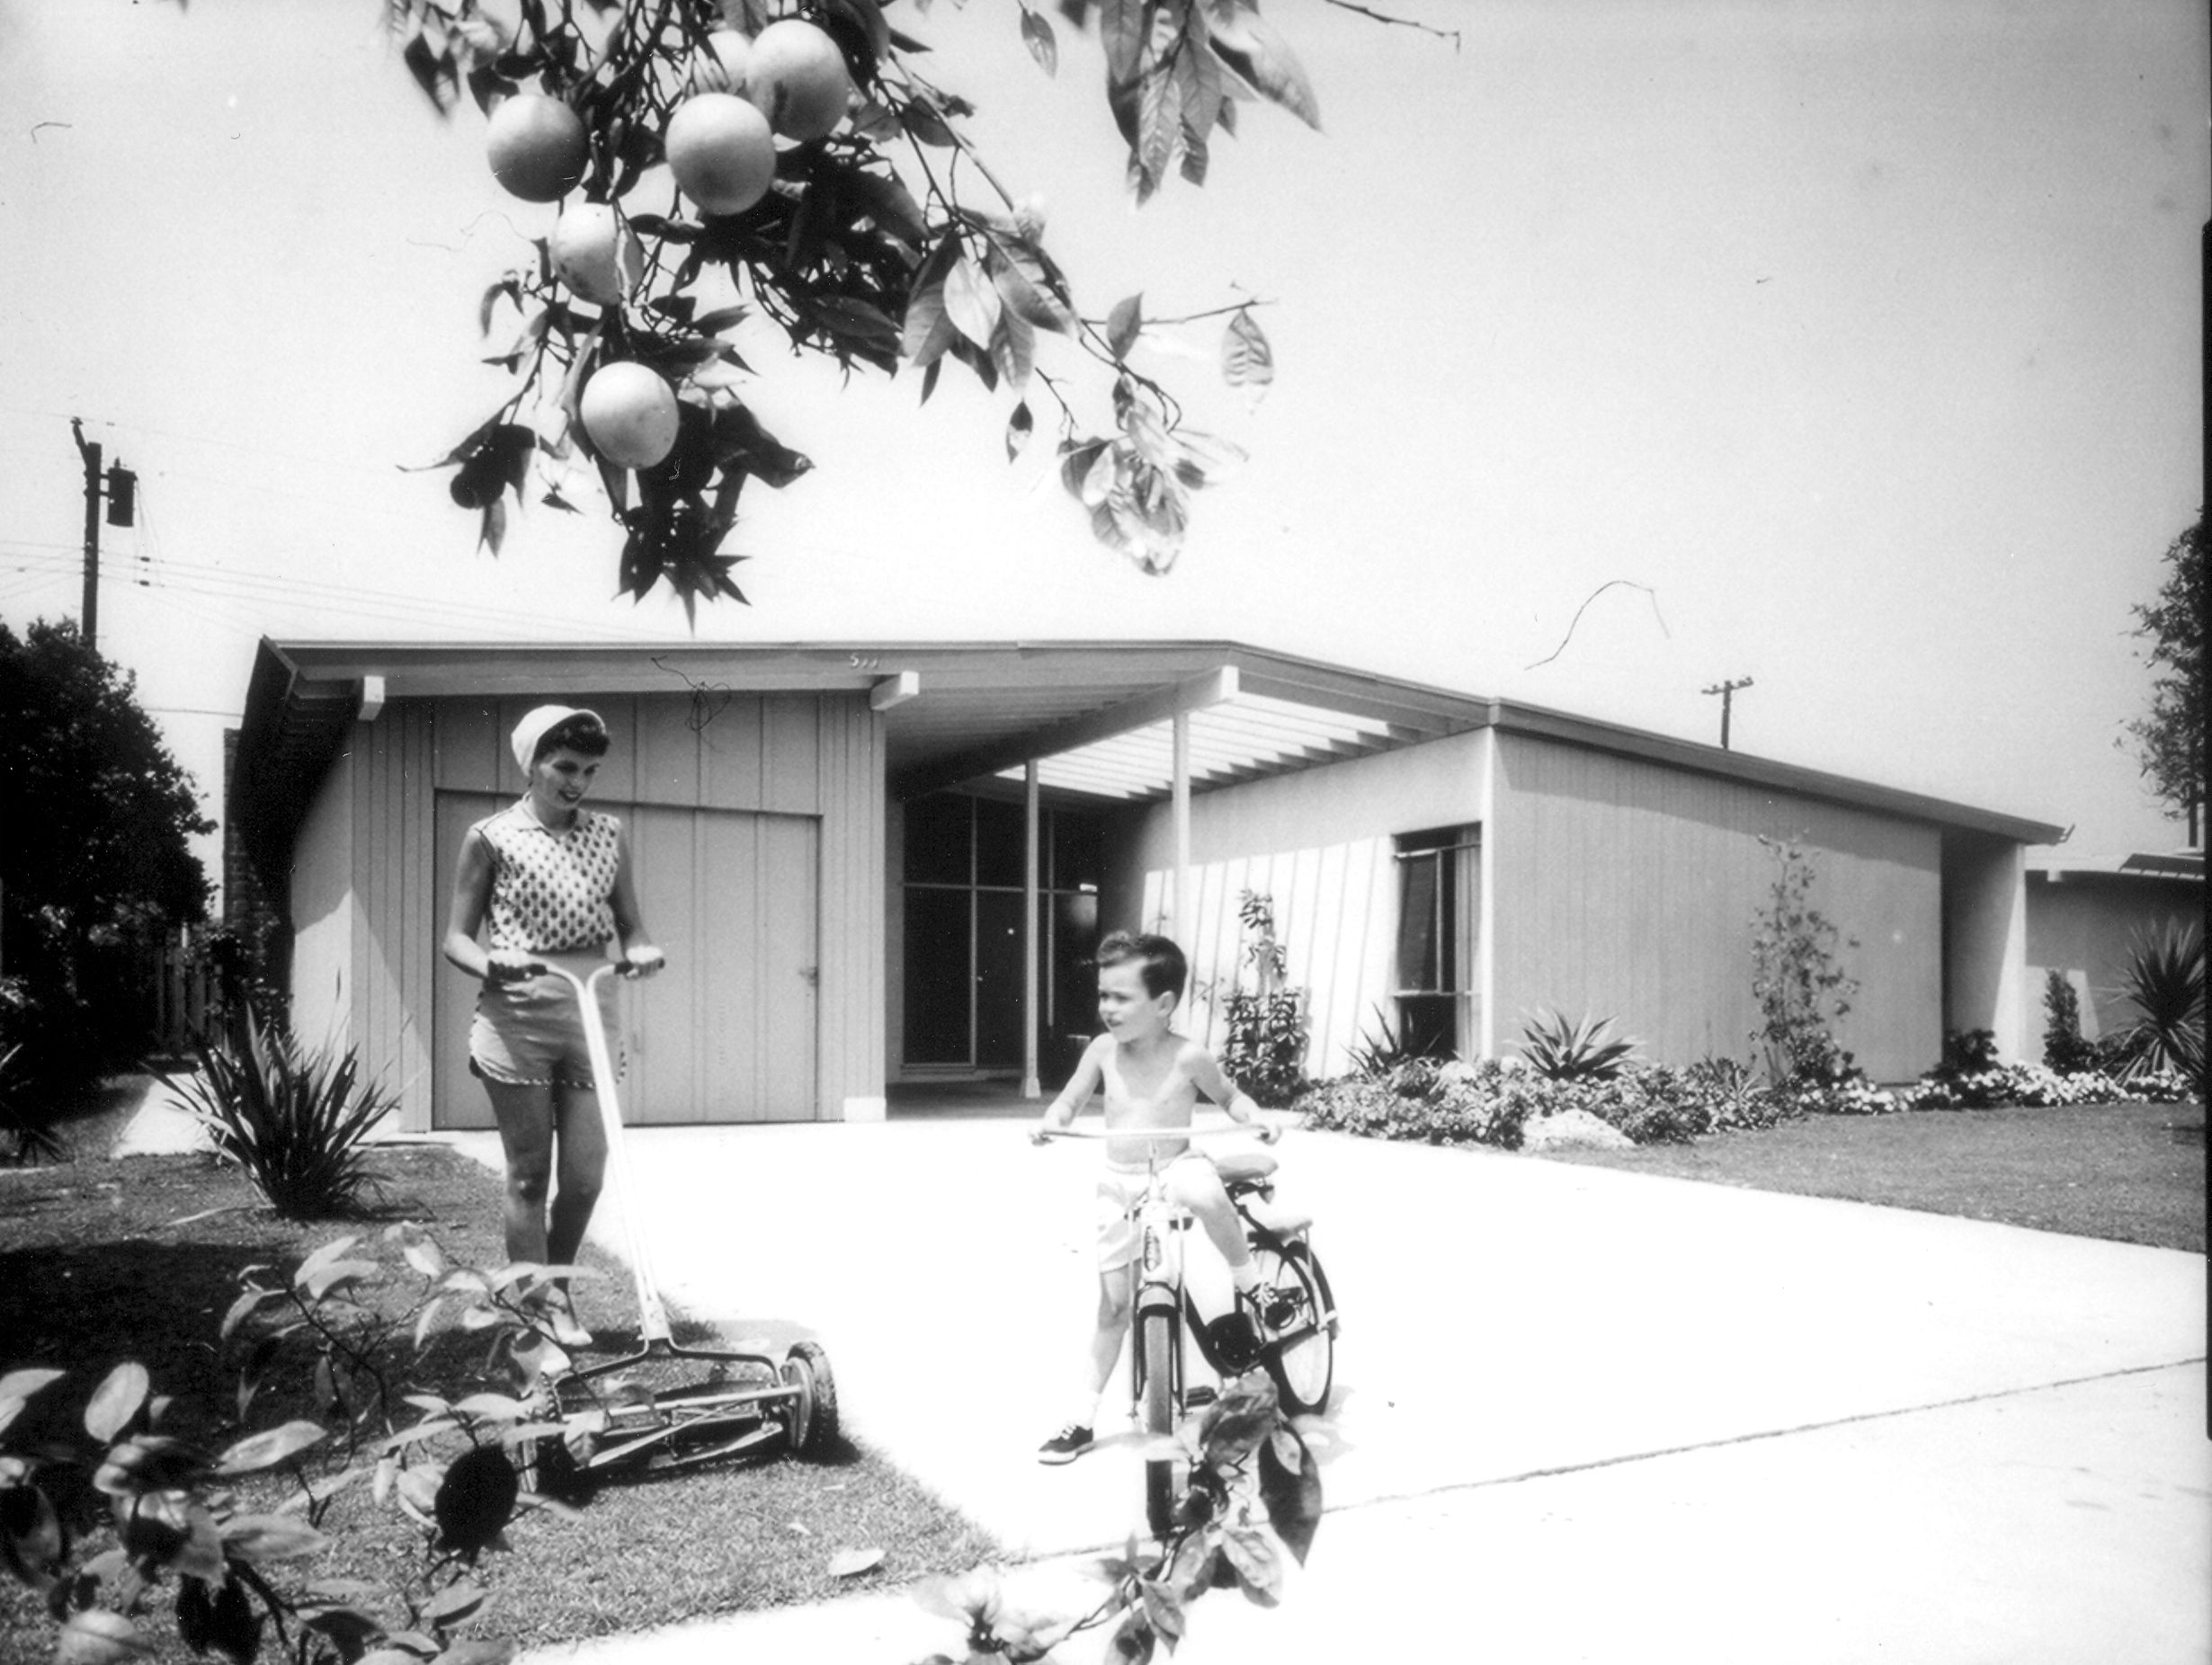 Woman in summer attire stands with a push mower in front of a mid-century modern Fullerton home,, while a young boy rides a bicycle. An orange tree hangs in the foreground.